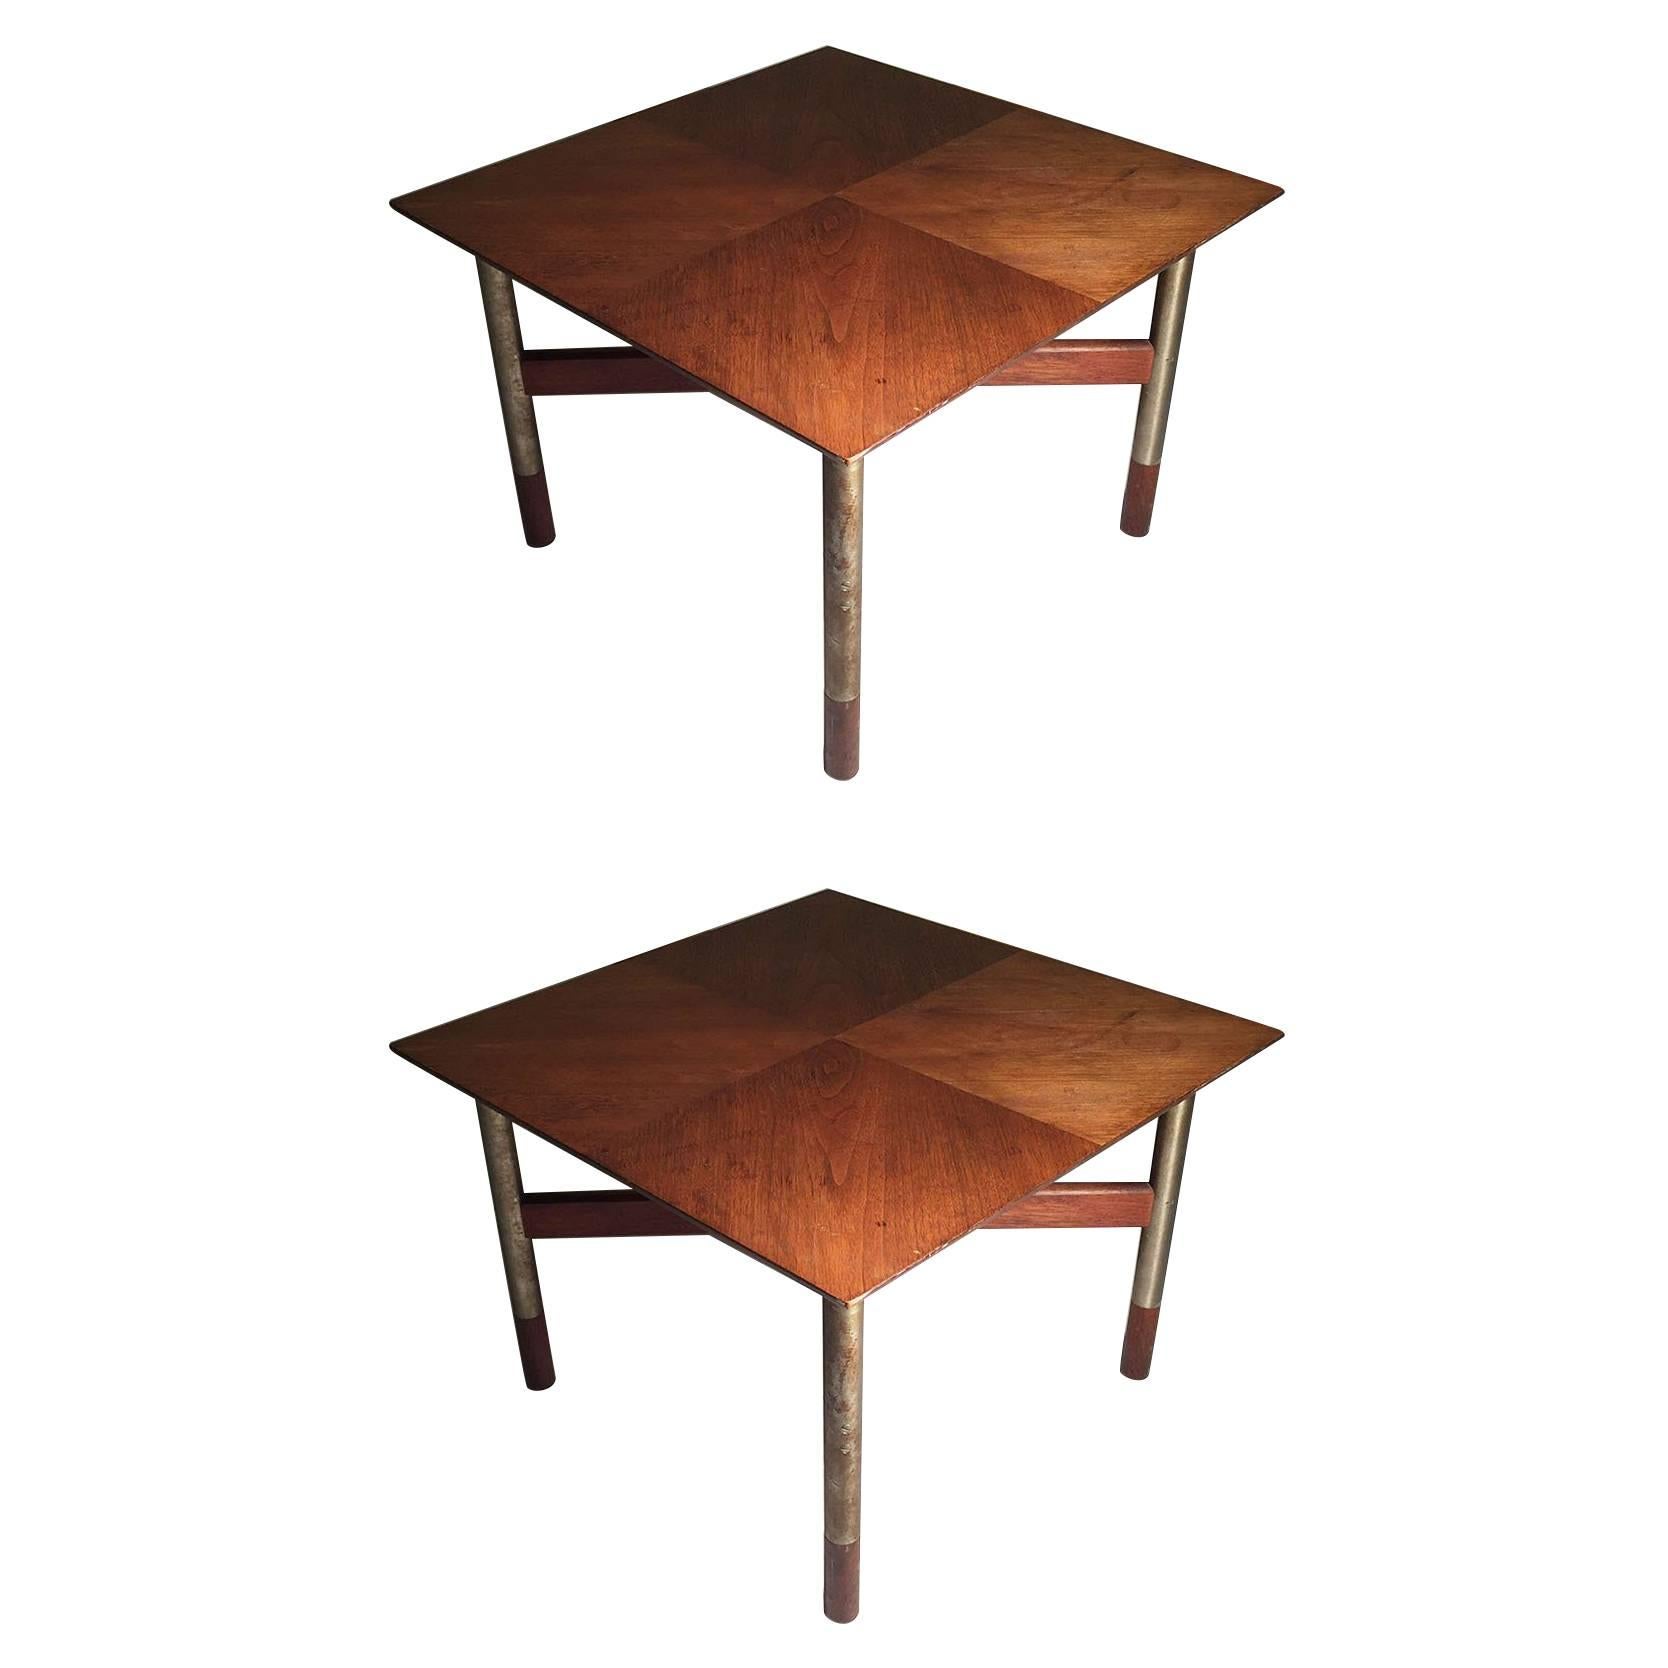 Mid-Century Walnut and Brushed Steel Pair of Tables by Jack Cartwright